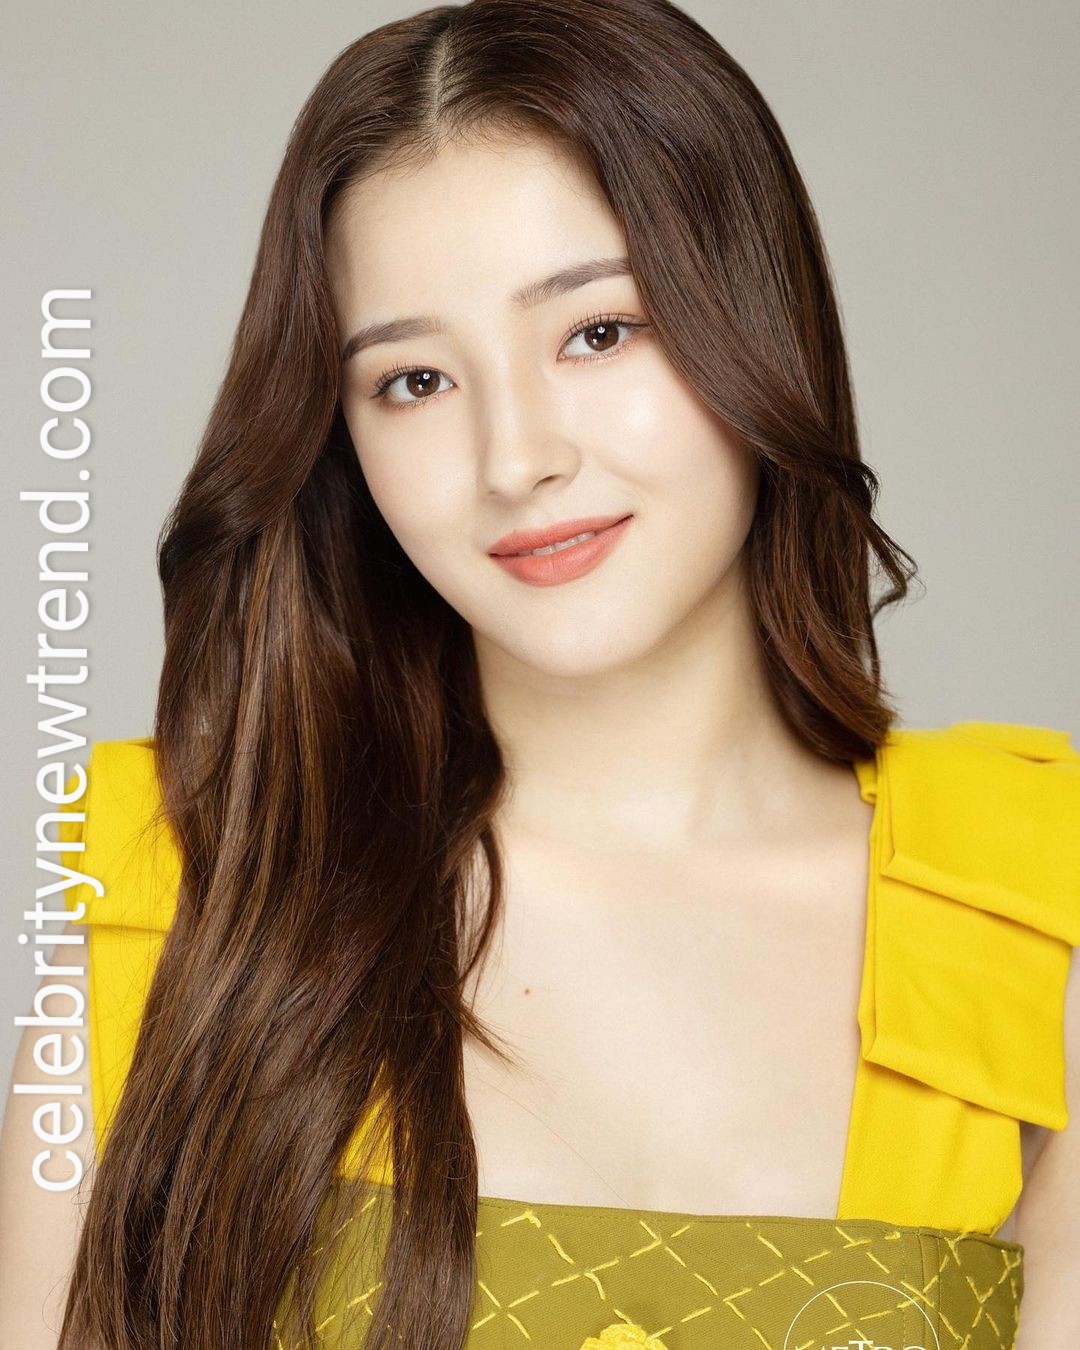 About Nancy Momoland, Biography of Nancy Momoland, Height, weight, body measurements, lifestyle and relationship status of Nancy Momoland, Facts about Nancy Momoland.